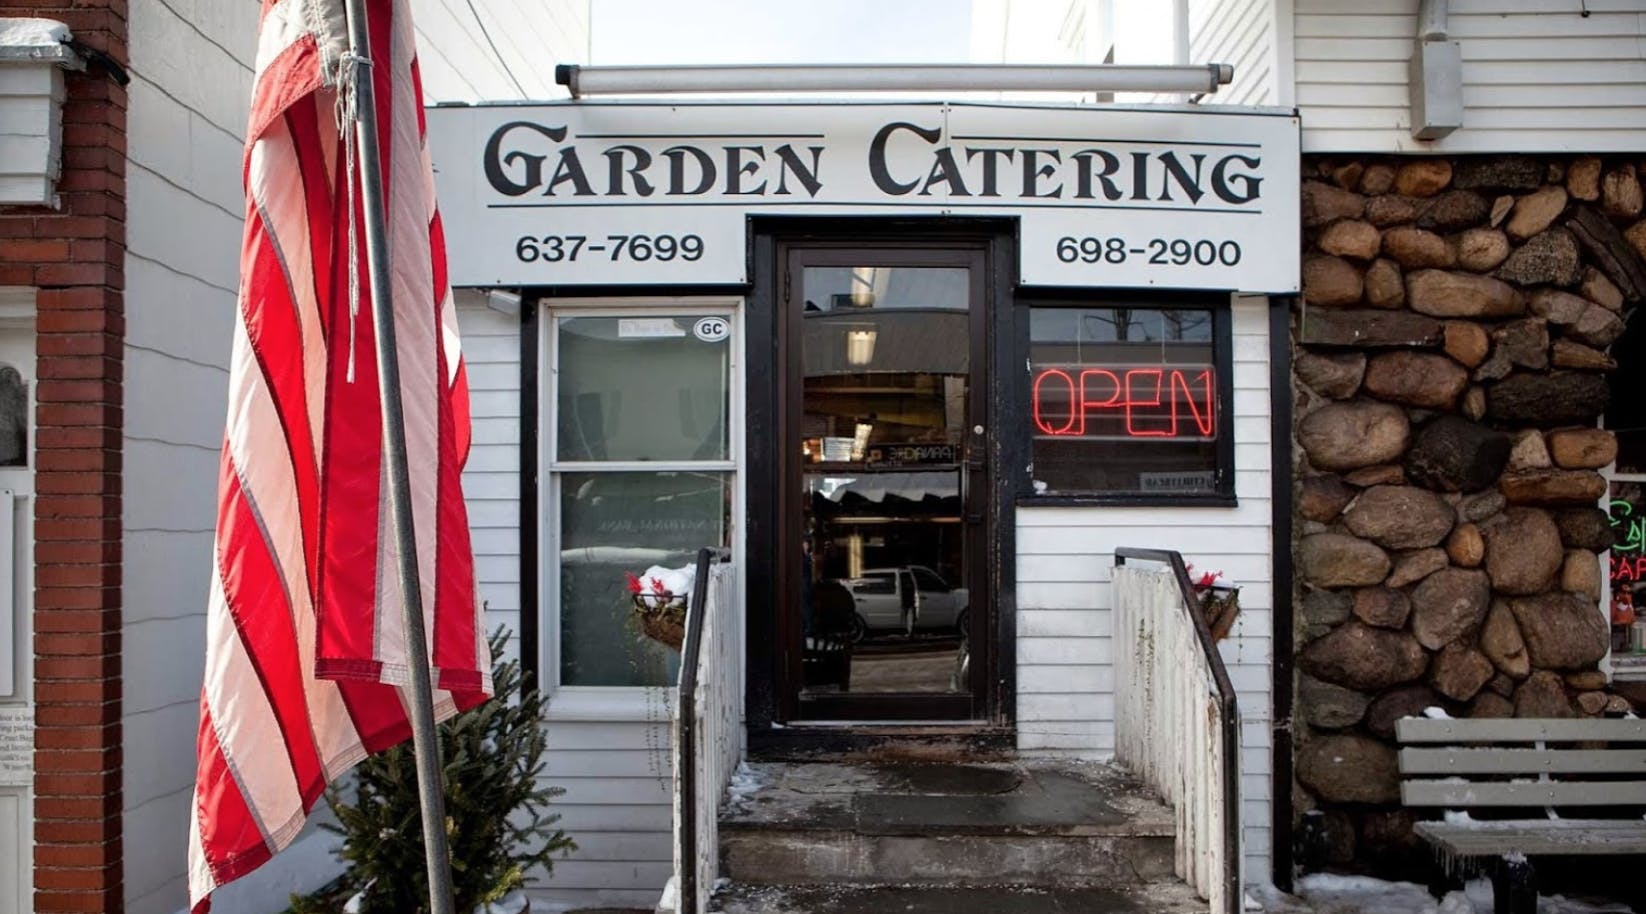 New Haven Hours Location Garden Catering The Best Nuggets Youll Ever Have - Locations In Ct Ny